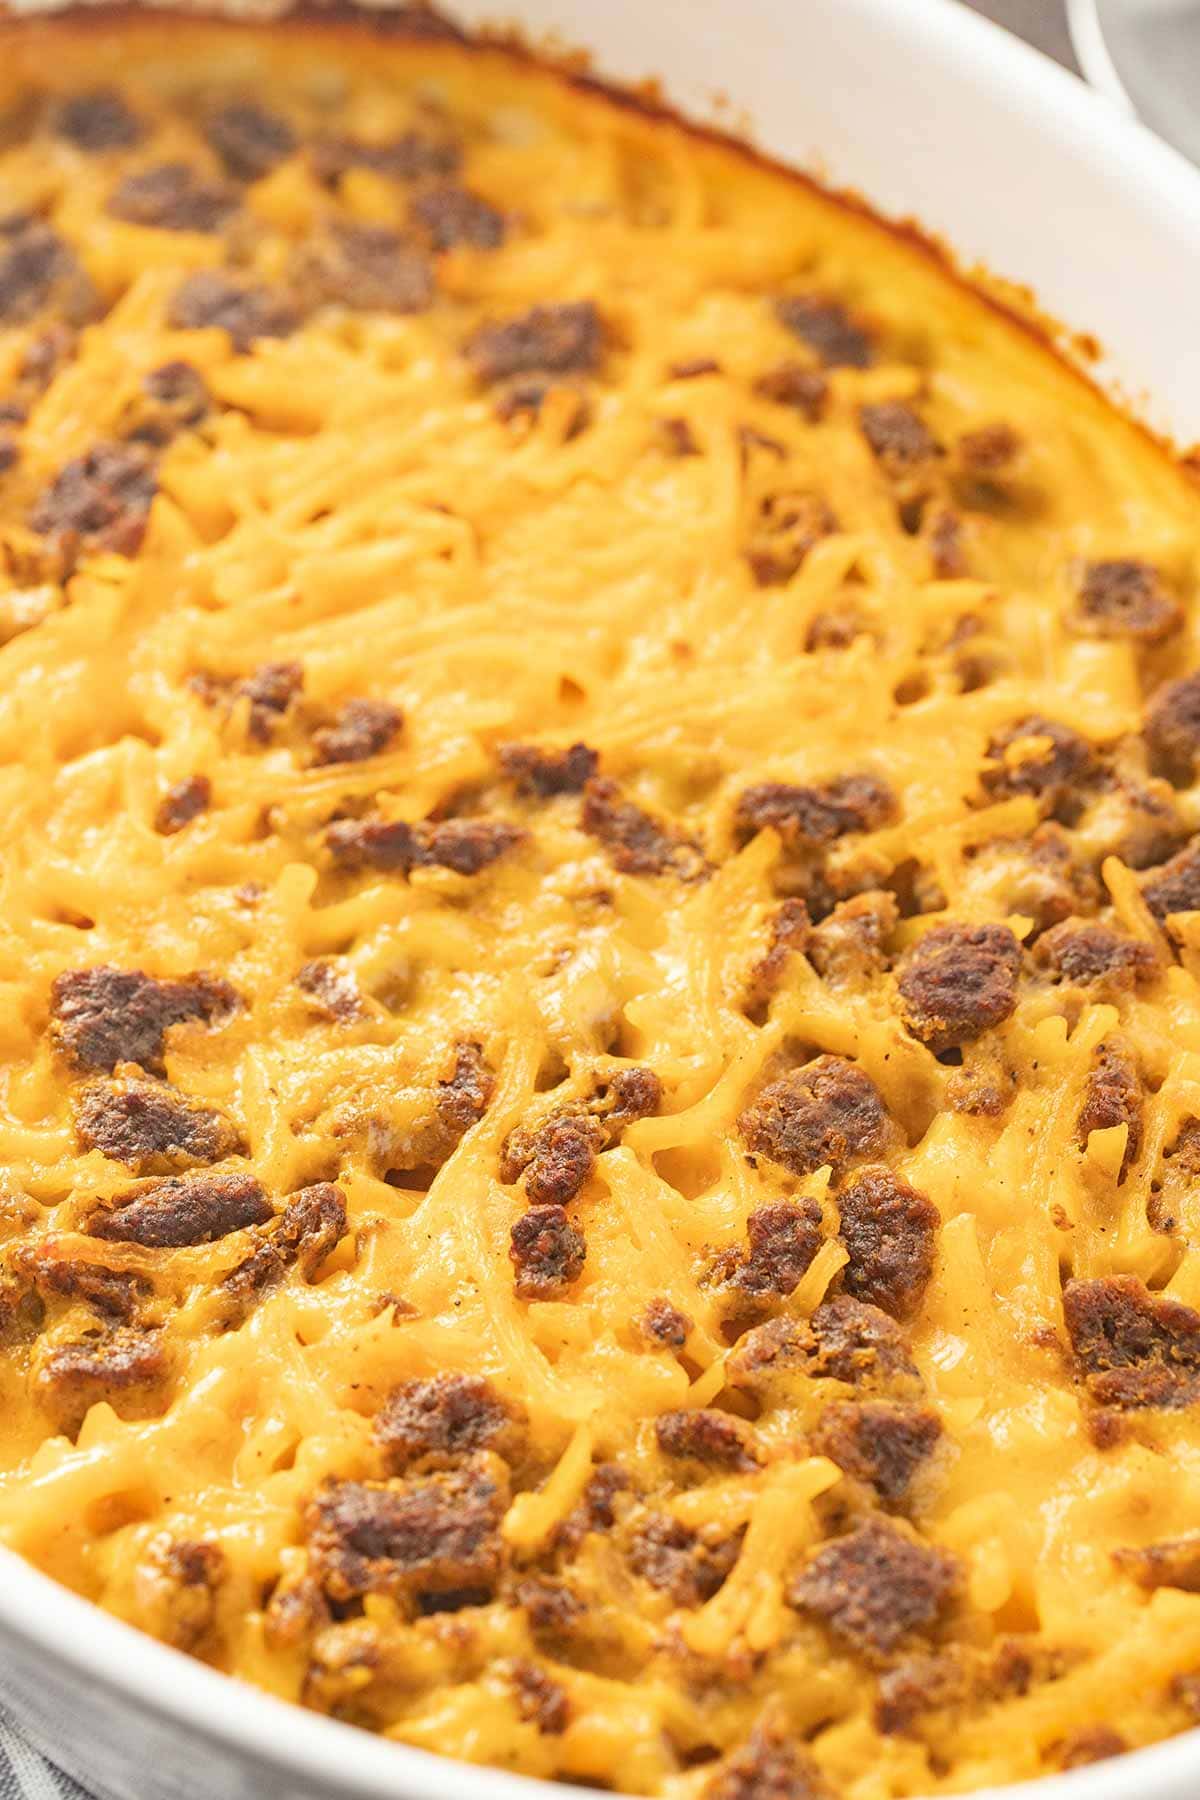 Close up of Potato Cheese Sausage Casserole, showing sausage bits and cheesy top, in white oval baking dish.